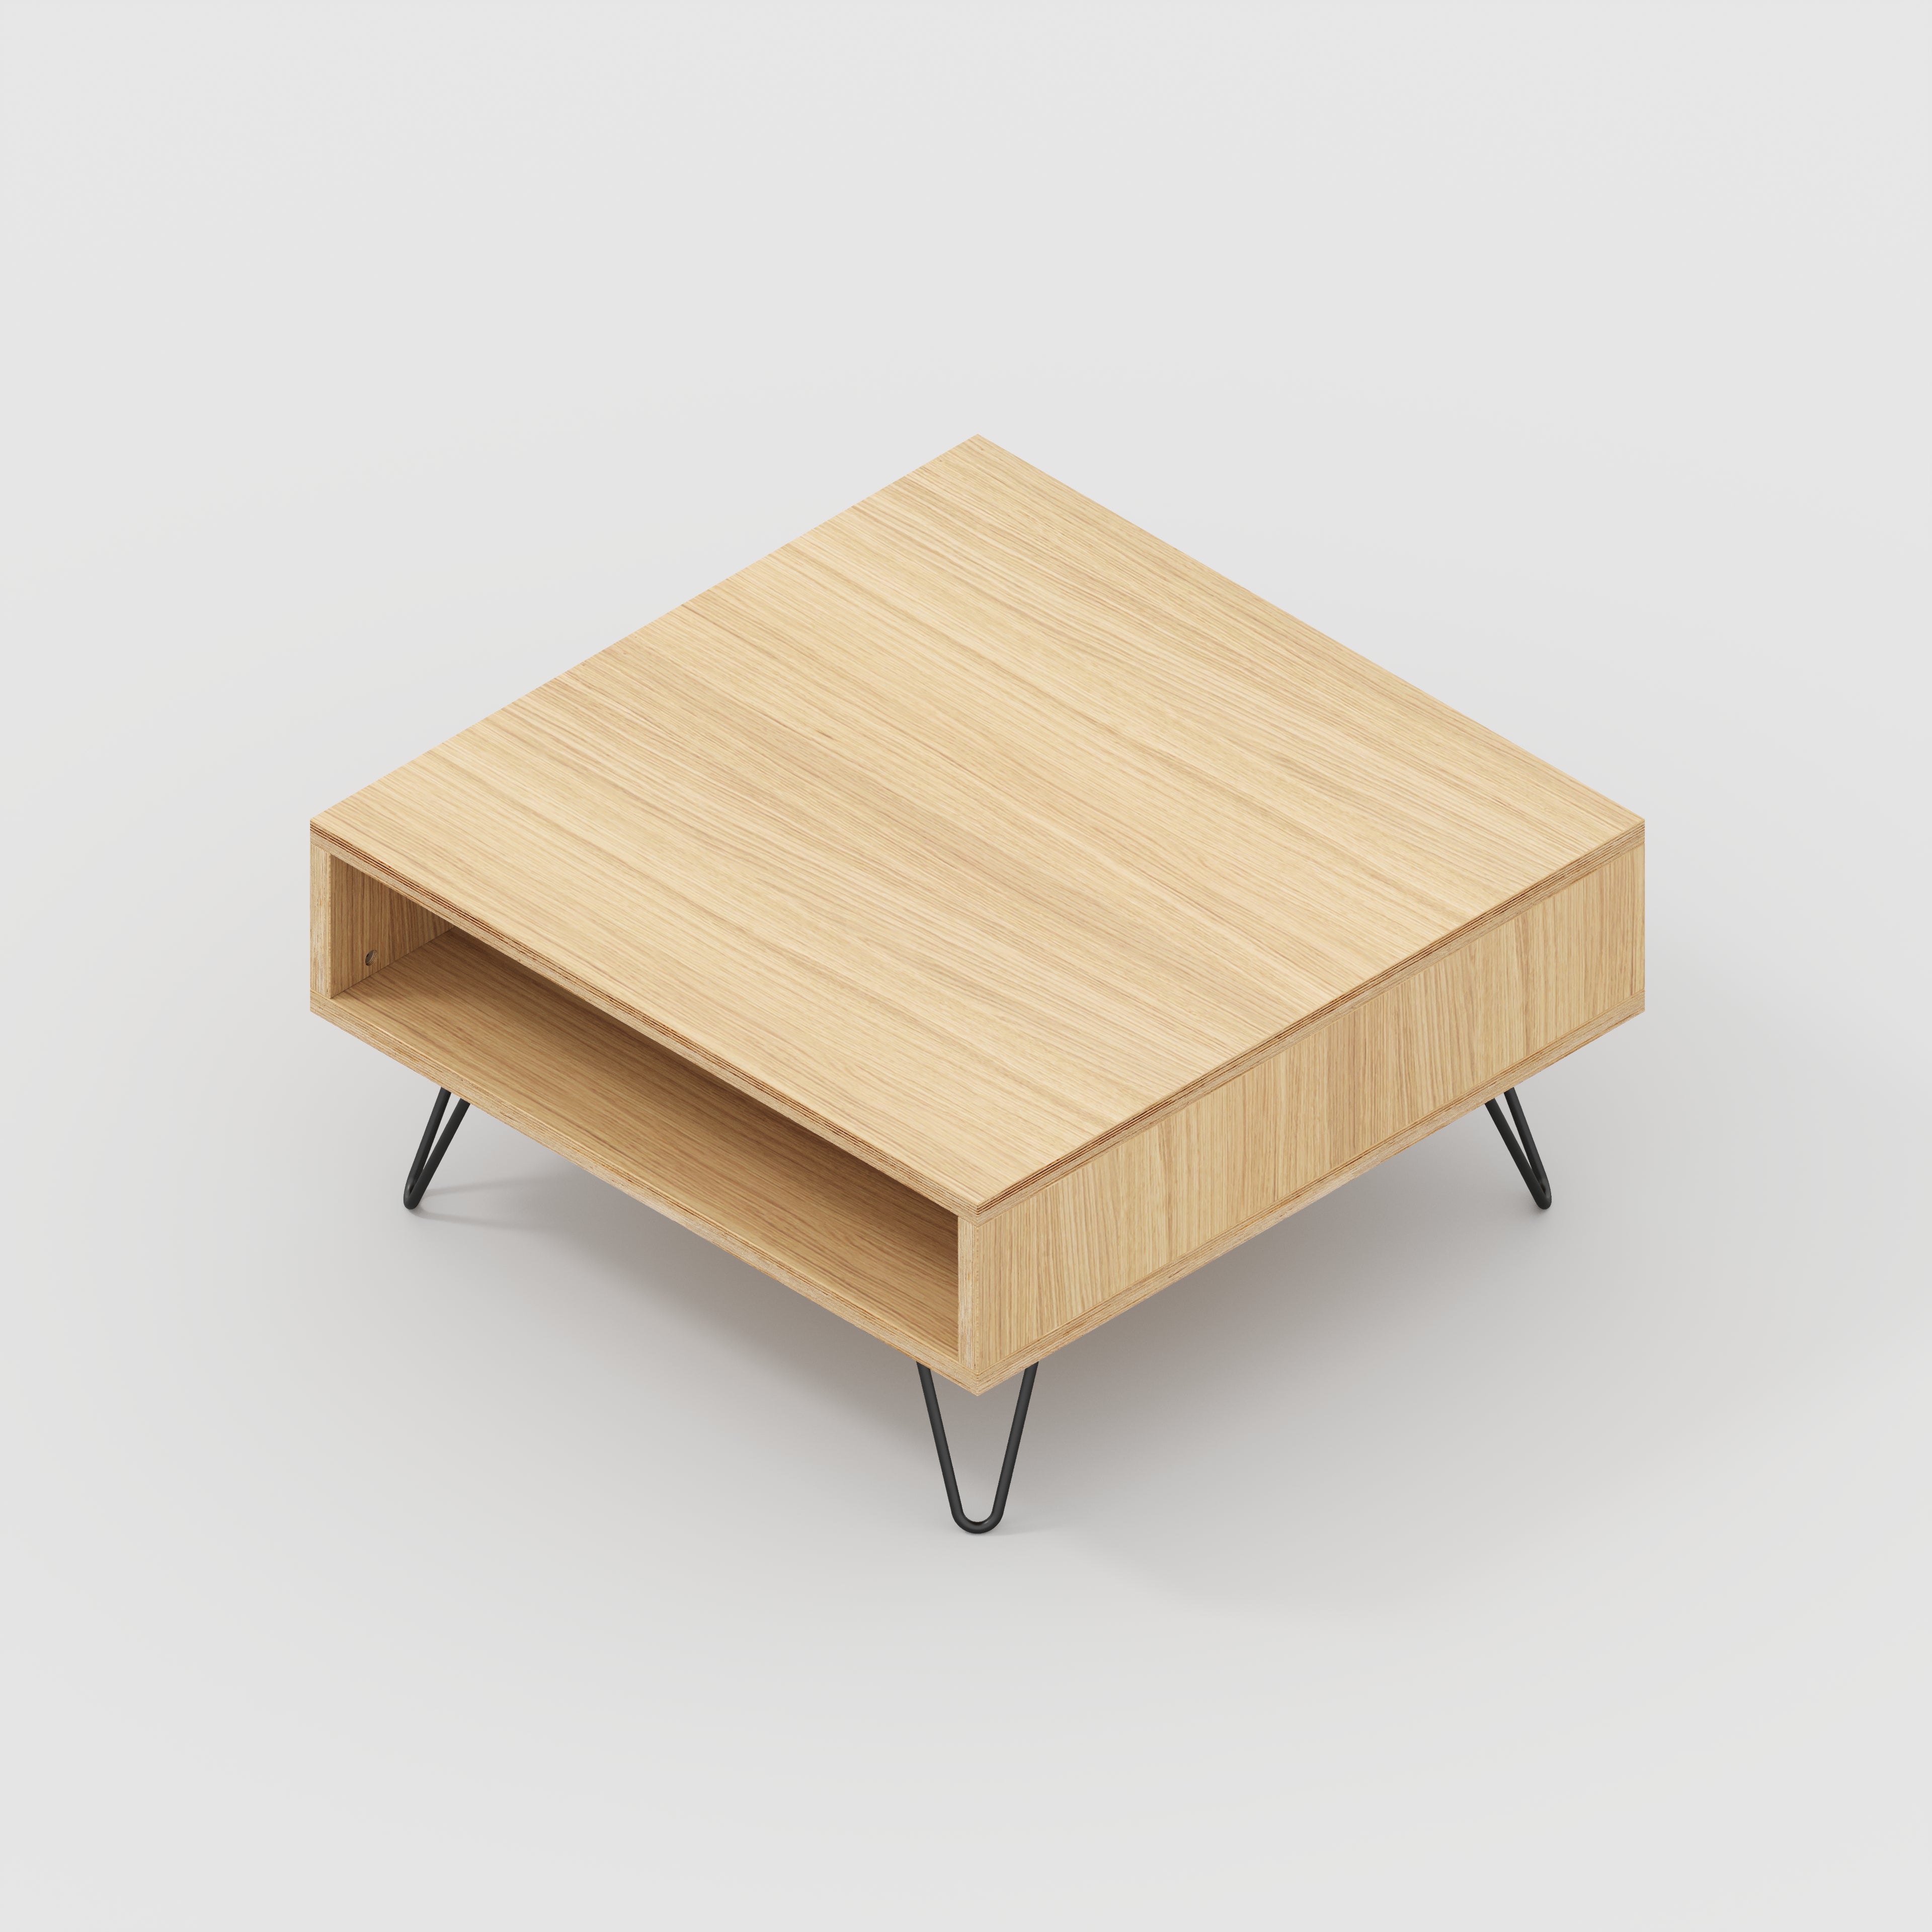 Coffee Table with Box Storage and Black Hairpin Legs - Plywood Oak - 800(w) x 800(d) x 400(h)